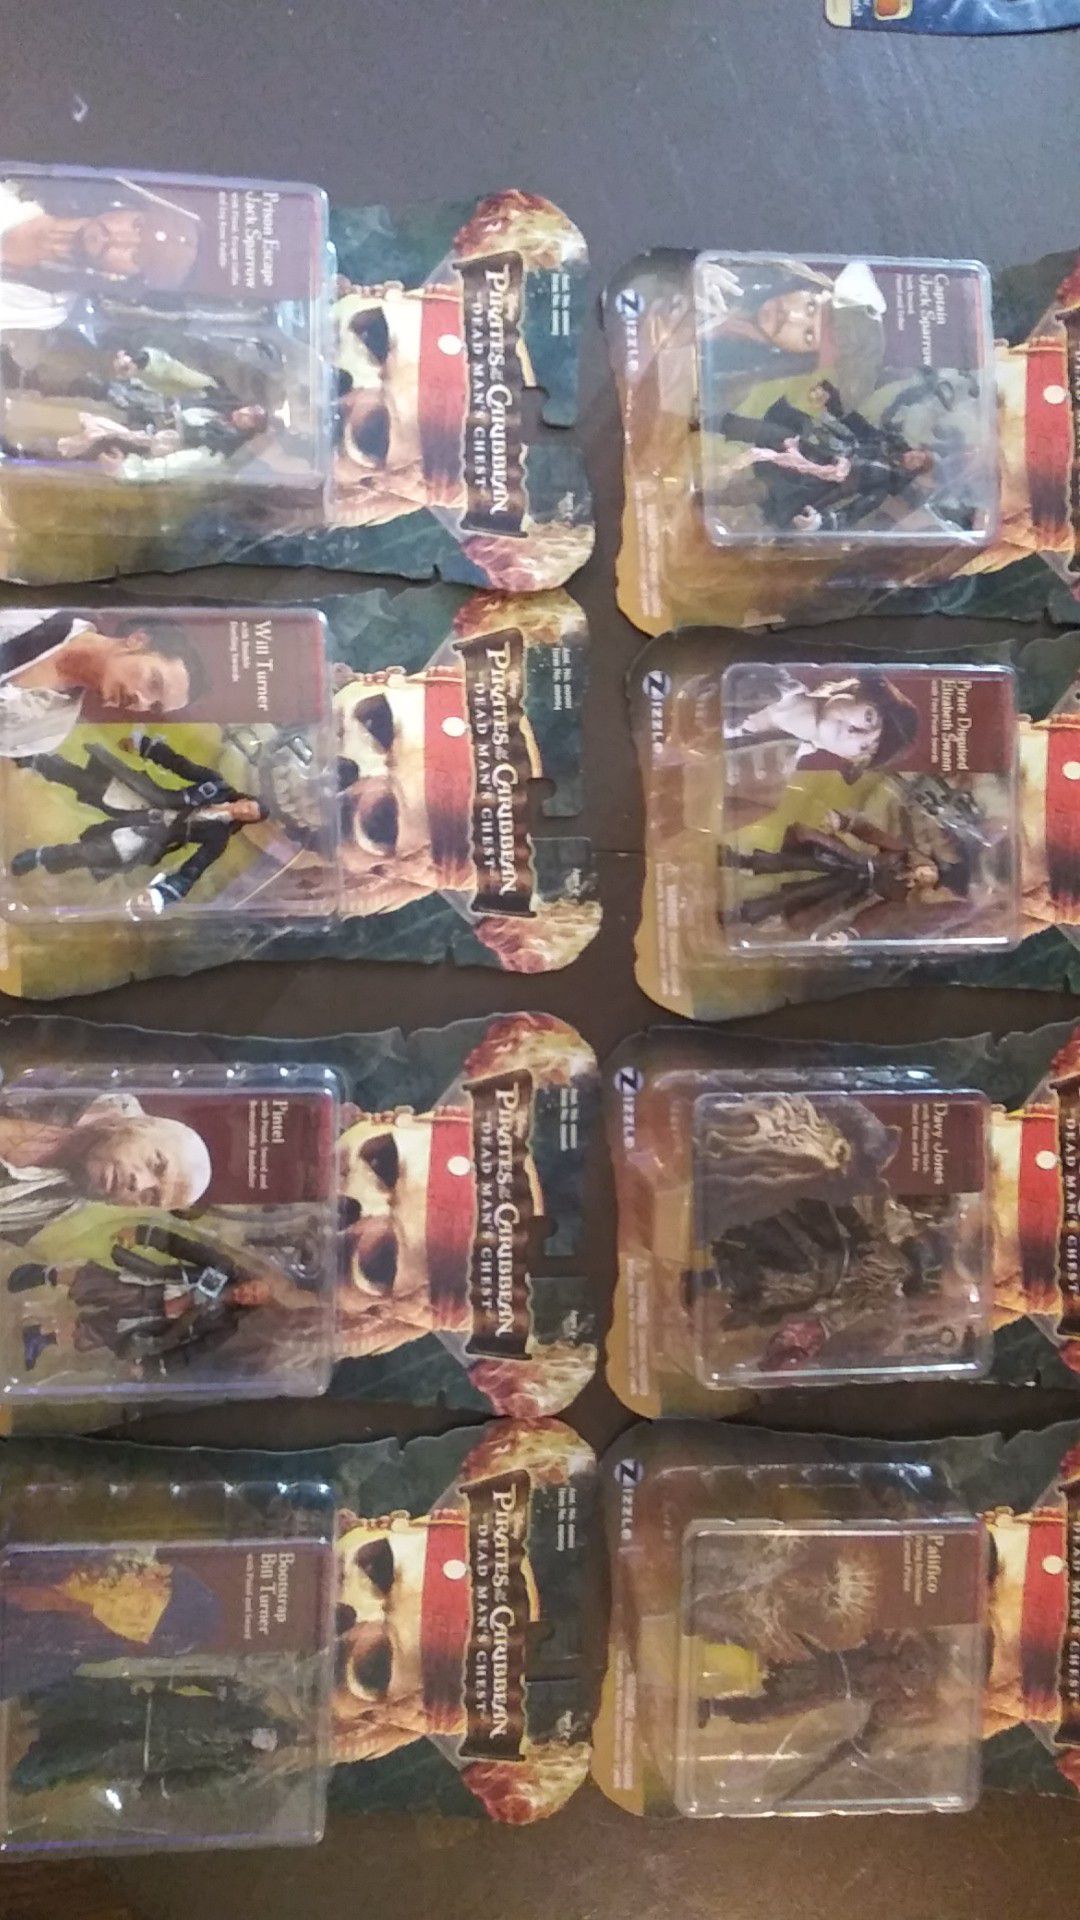 Pirates of the Caribbean dead man's chest figures